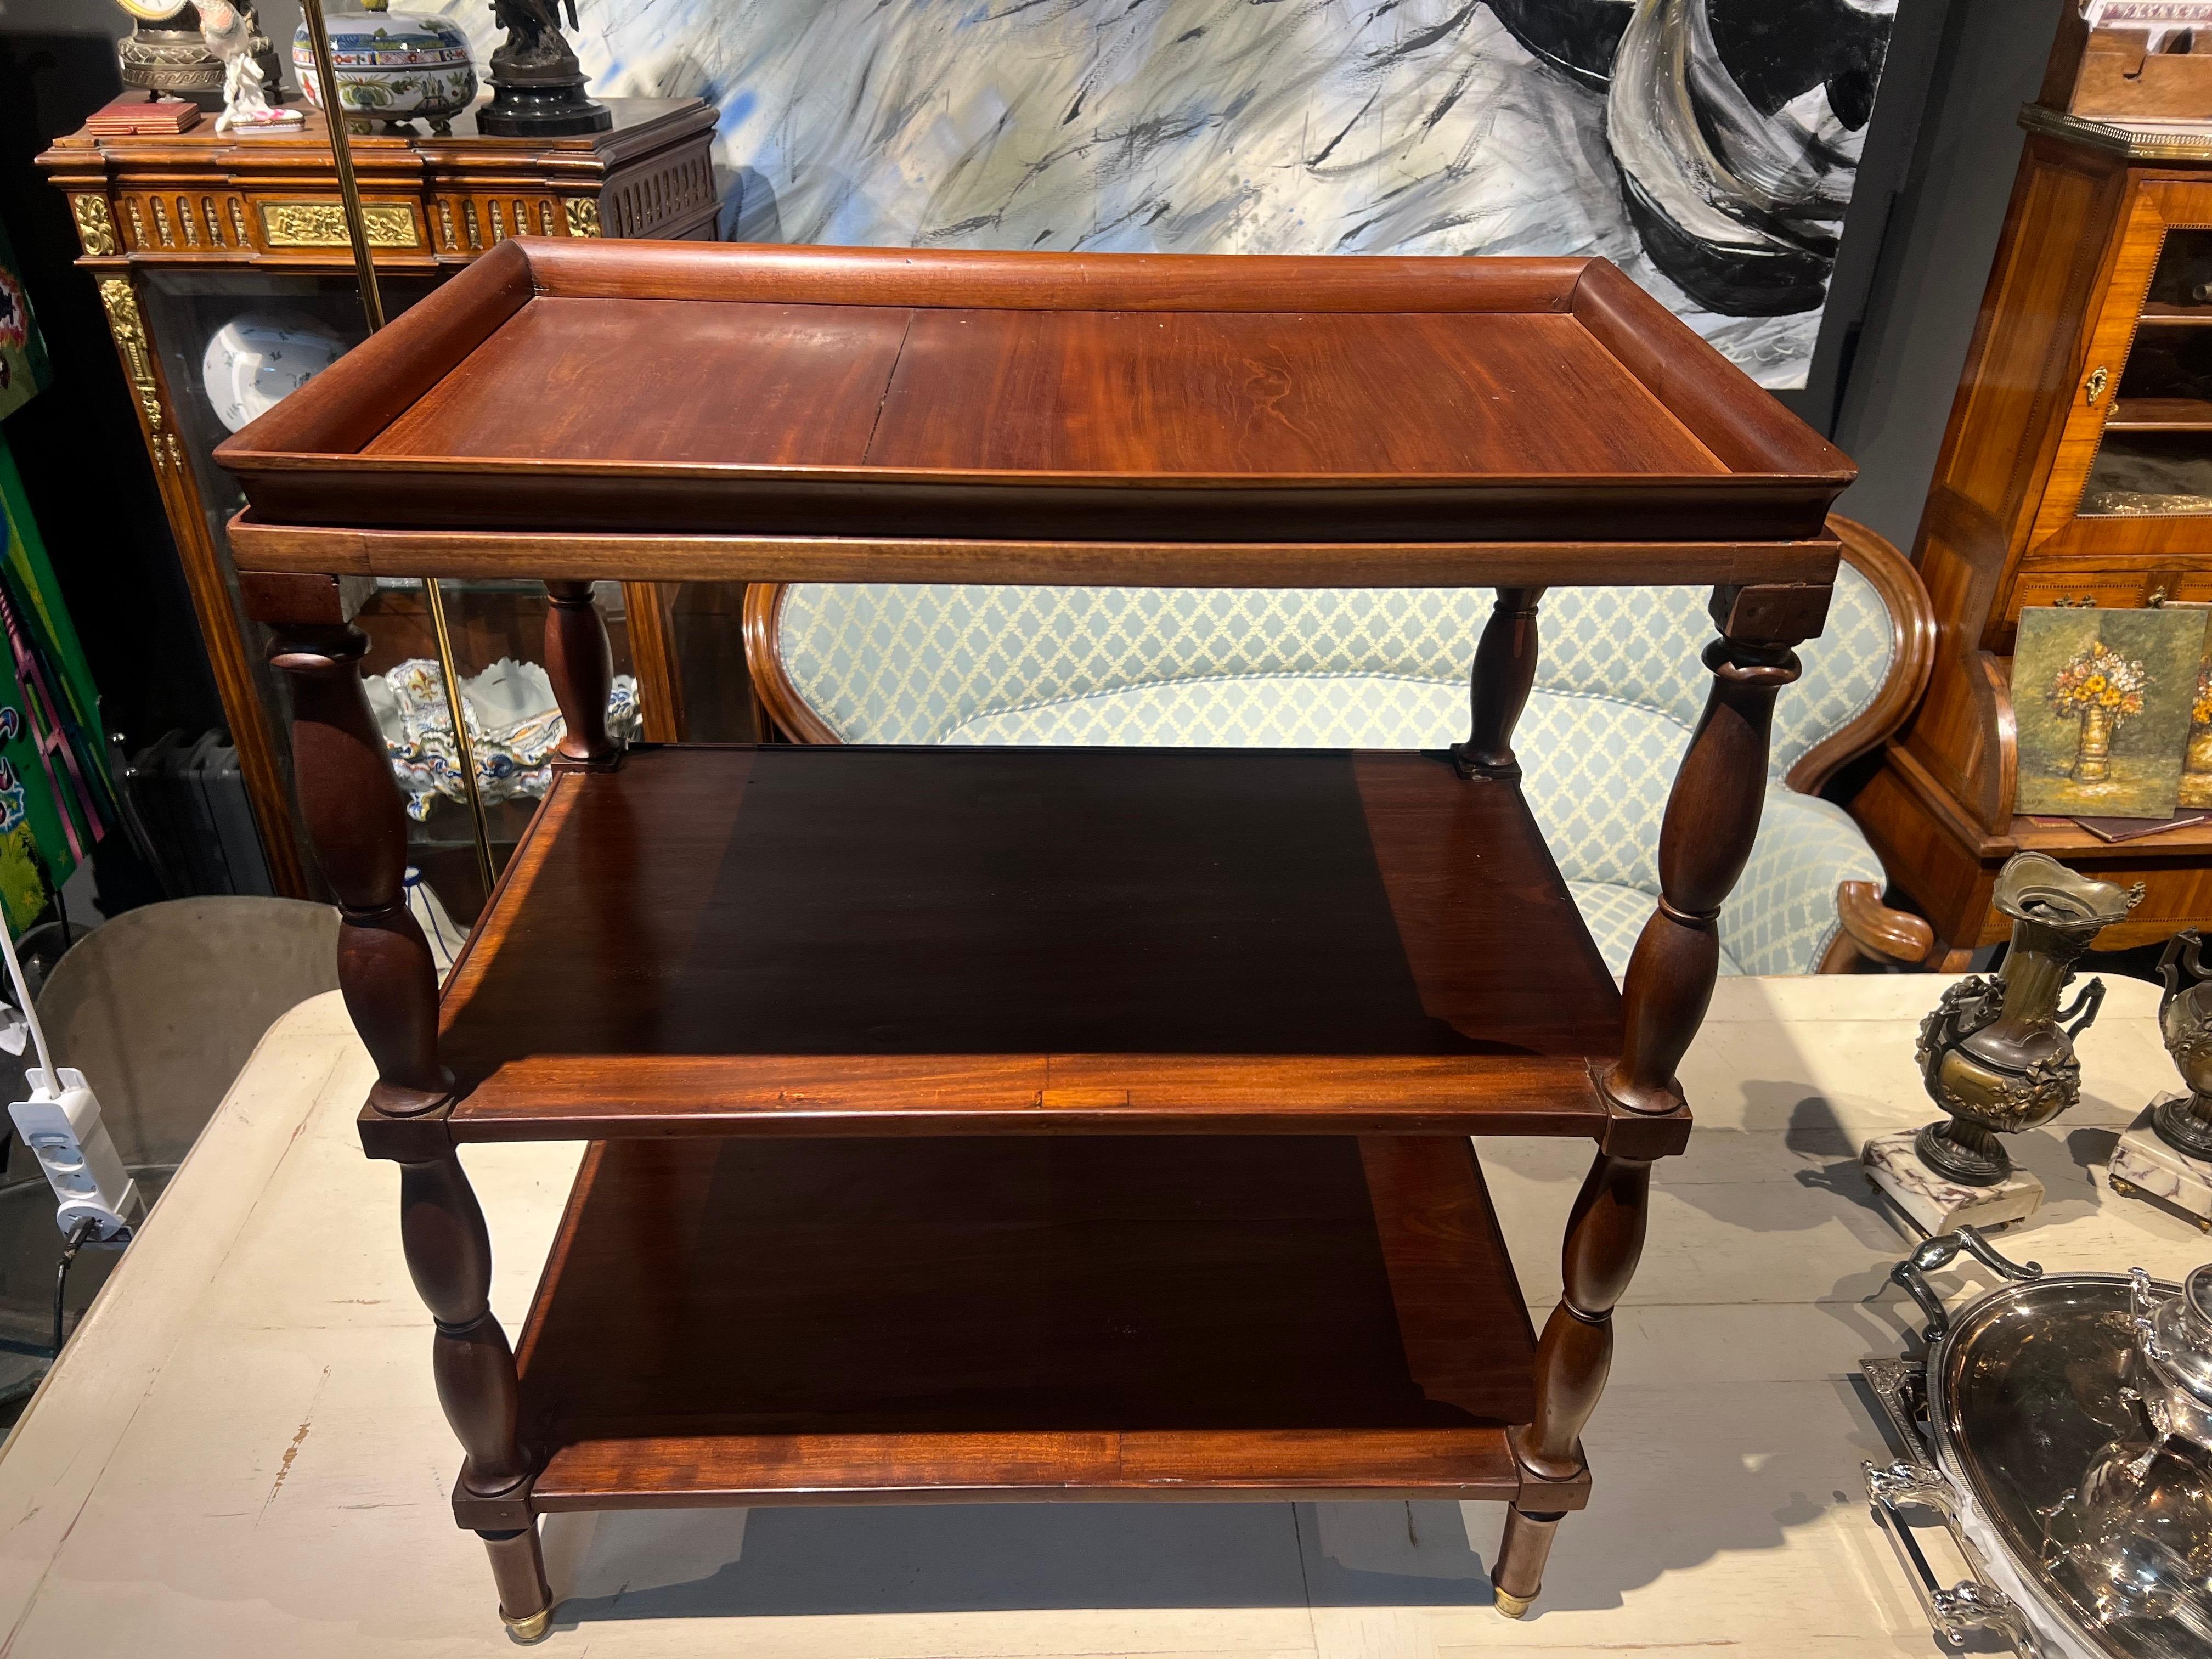 20th Century English mahogany hand carved serving or side table on three levels having bamboo shaped legs raised on elegant brass boots. Very good authentic condition with no restorations made.
England, circa 1920 